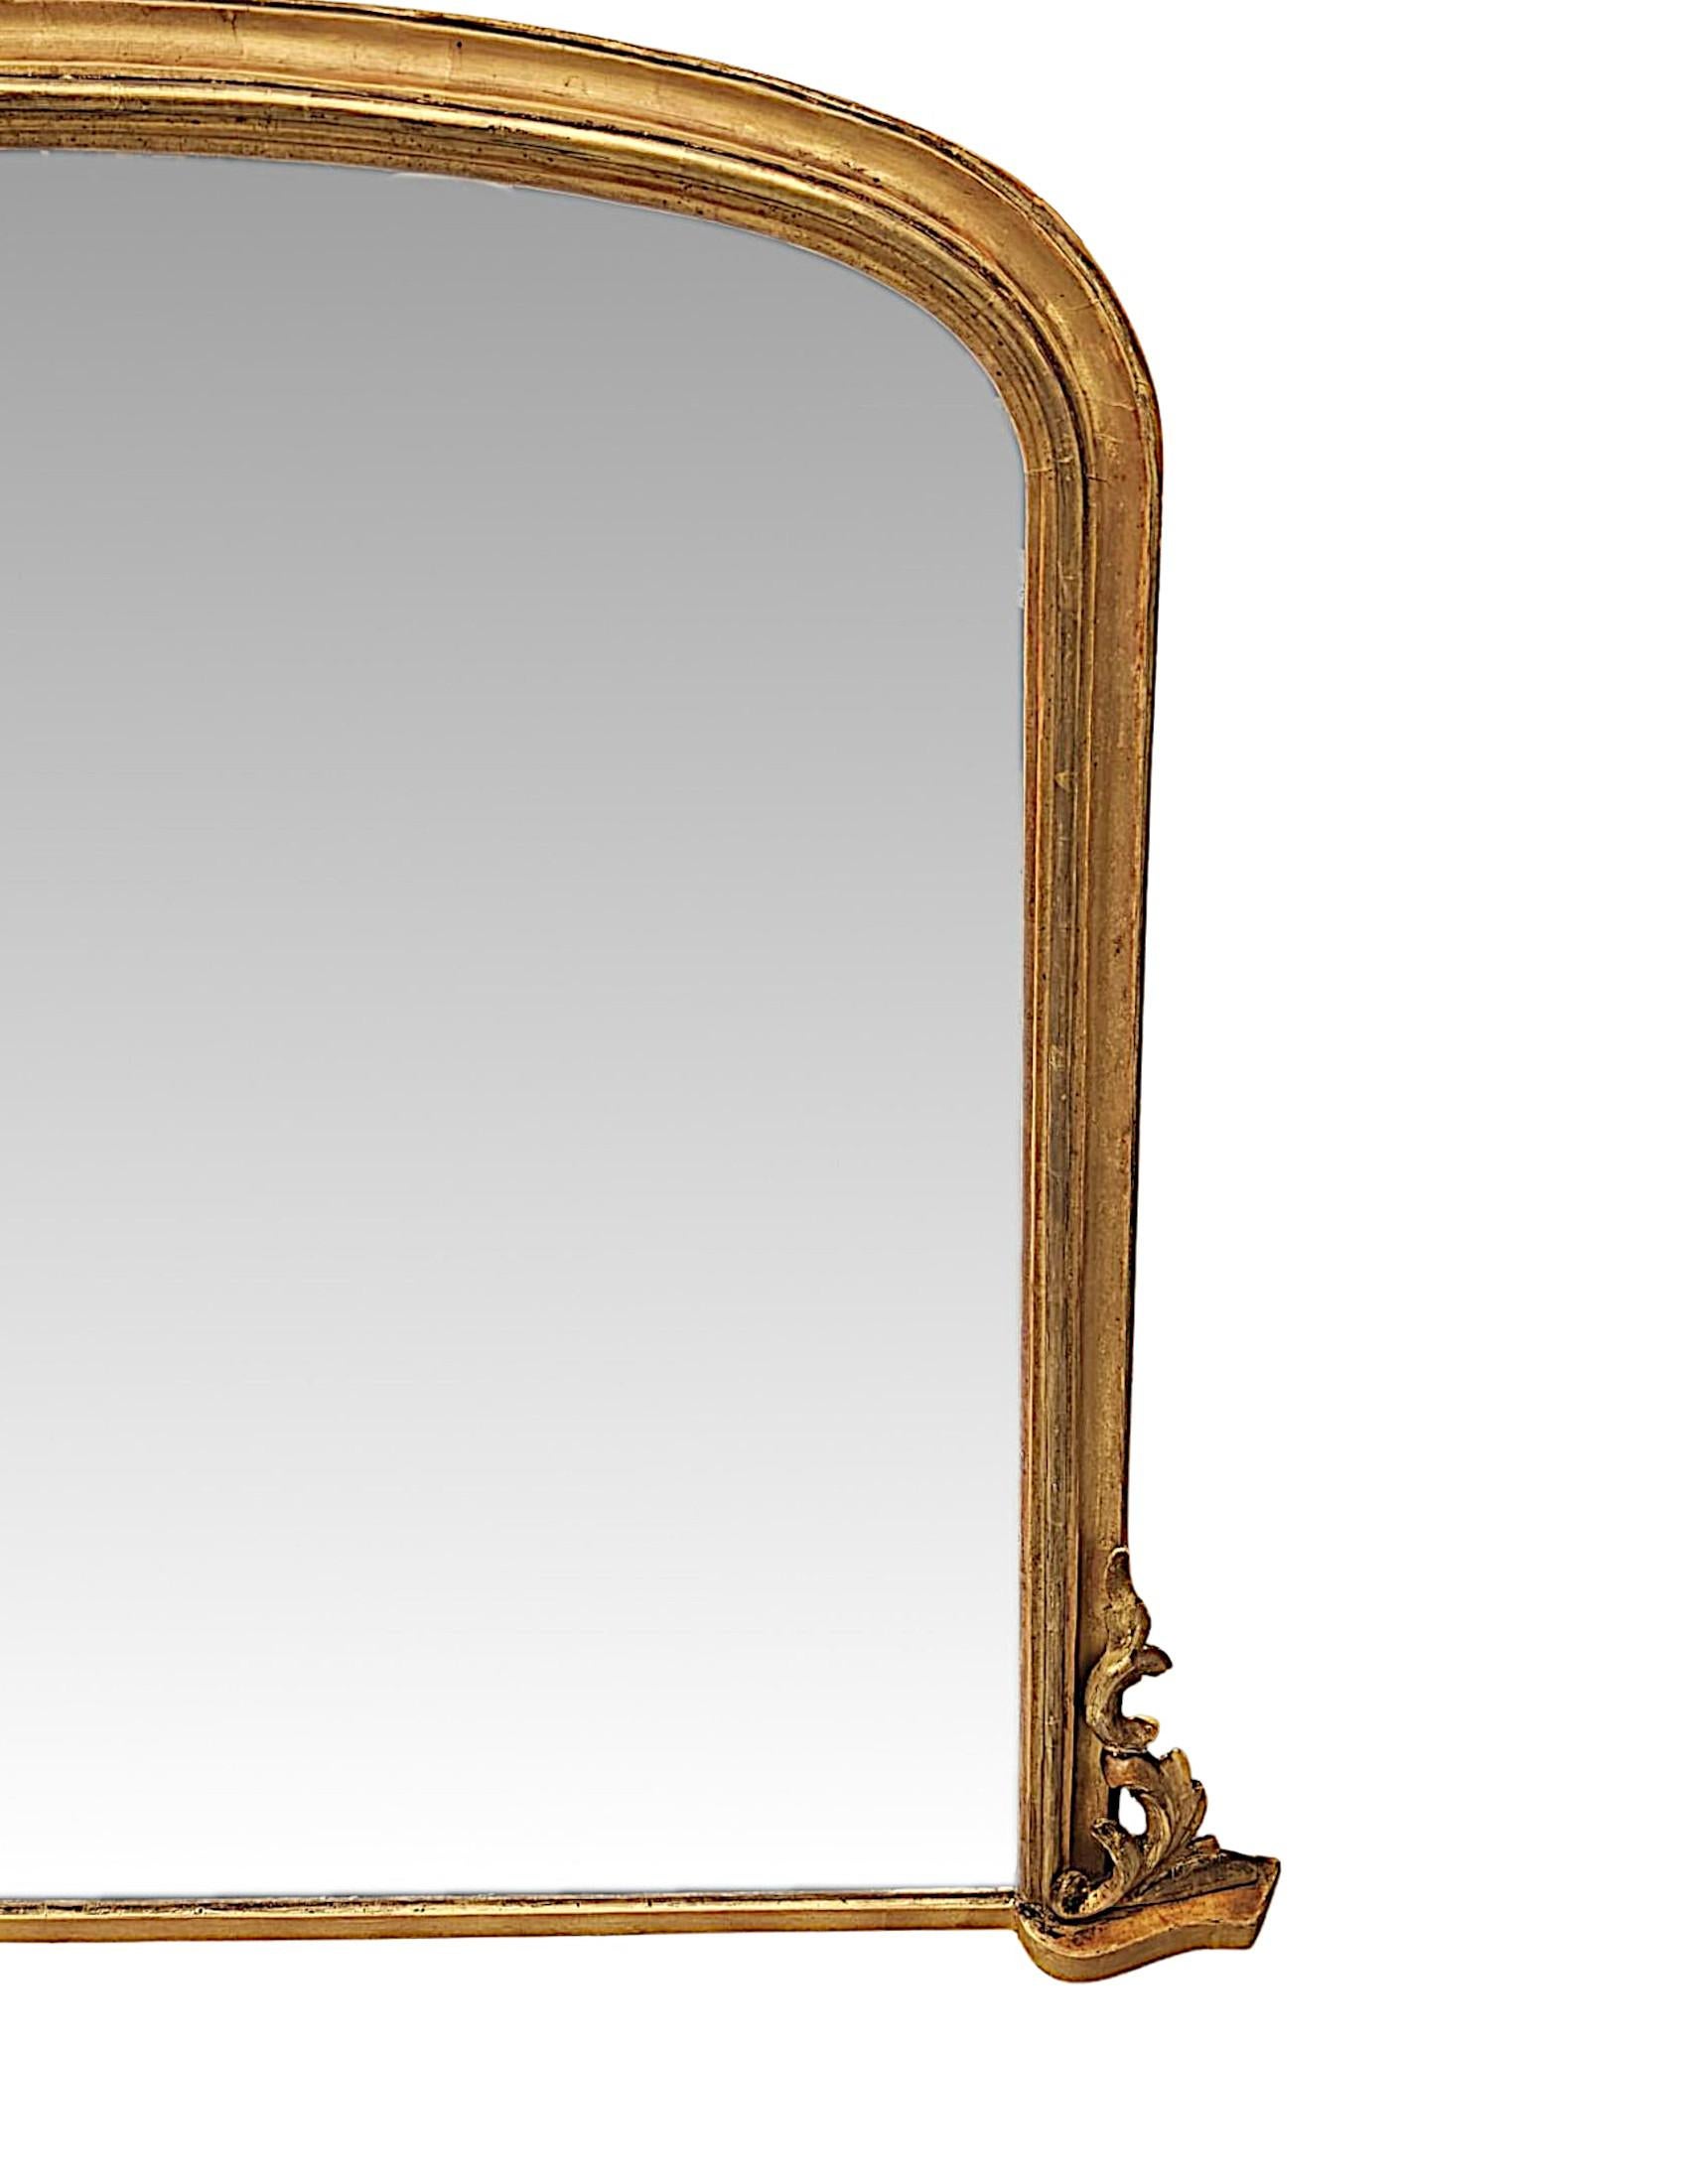 English  A Fabulous 19th Century Giltwood Archtop Overmantel Mirror For Sale